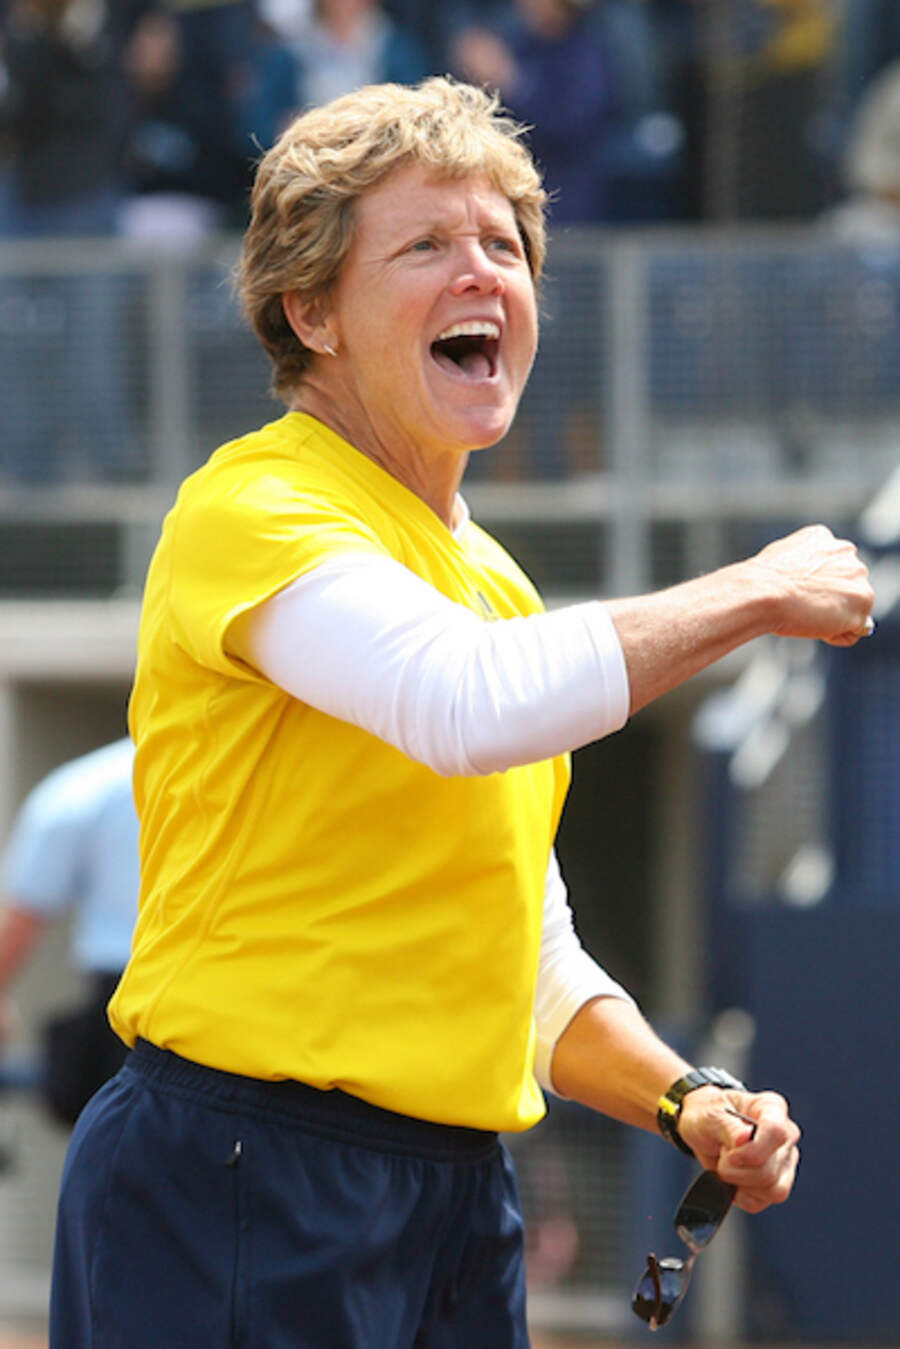 Carol Hutchins on consistency: Softball is rarely seen as the arena for hard lessons in life. But not if you are Hutchins, the iconic head coach of the Michigan Wolverines softball team. In her 37-year stint at Michigan, Hutchins oversaw 1,707 wins, more than any other coach in university softball history in the US (fiercely competitive as it is). Even though the Wolverines were not always the best team in the land, Hutchins was able to imbibe a level of consistency that made her squad invariably competitive. In doing so, there are three qualities Hutchins can teach us — the importance of repeating routines which work for us, the need to recharge during our down-time to keep our minds and bodies fresh for pressure situations, and the instinct to understand when to step our game by peaking at the right time